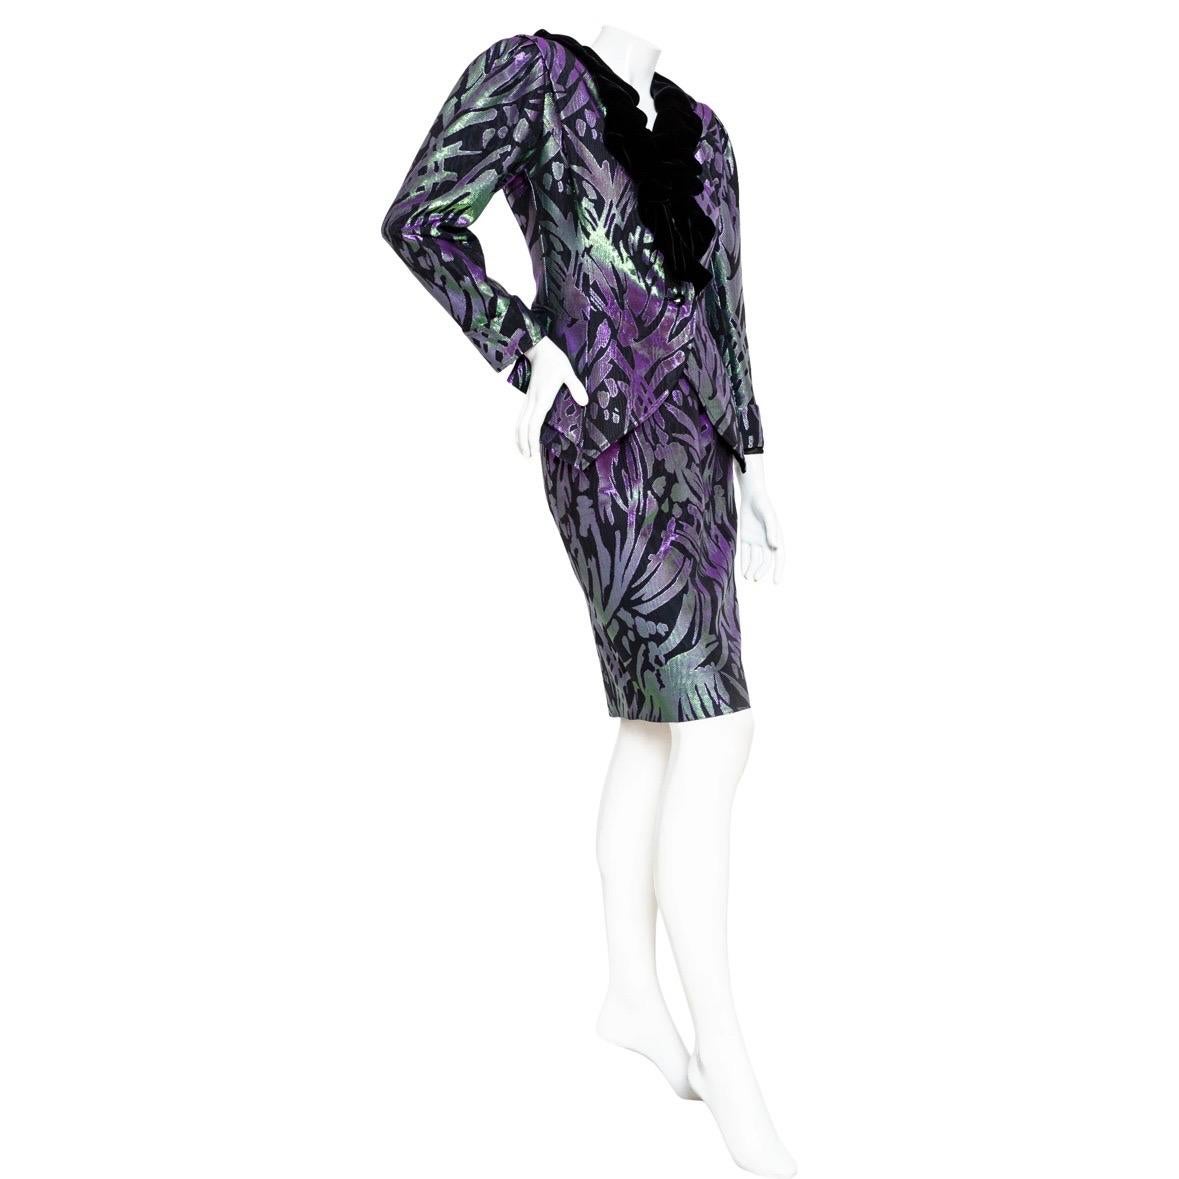 Emanuel Ungaro Vintage Iridescent Jacket and Skirt Suit (1988) In Good Condition For Sale In Los Angeles, CA